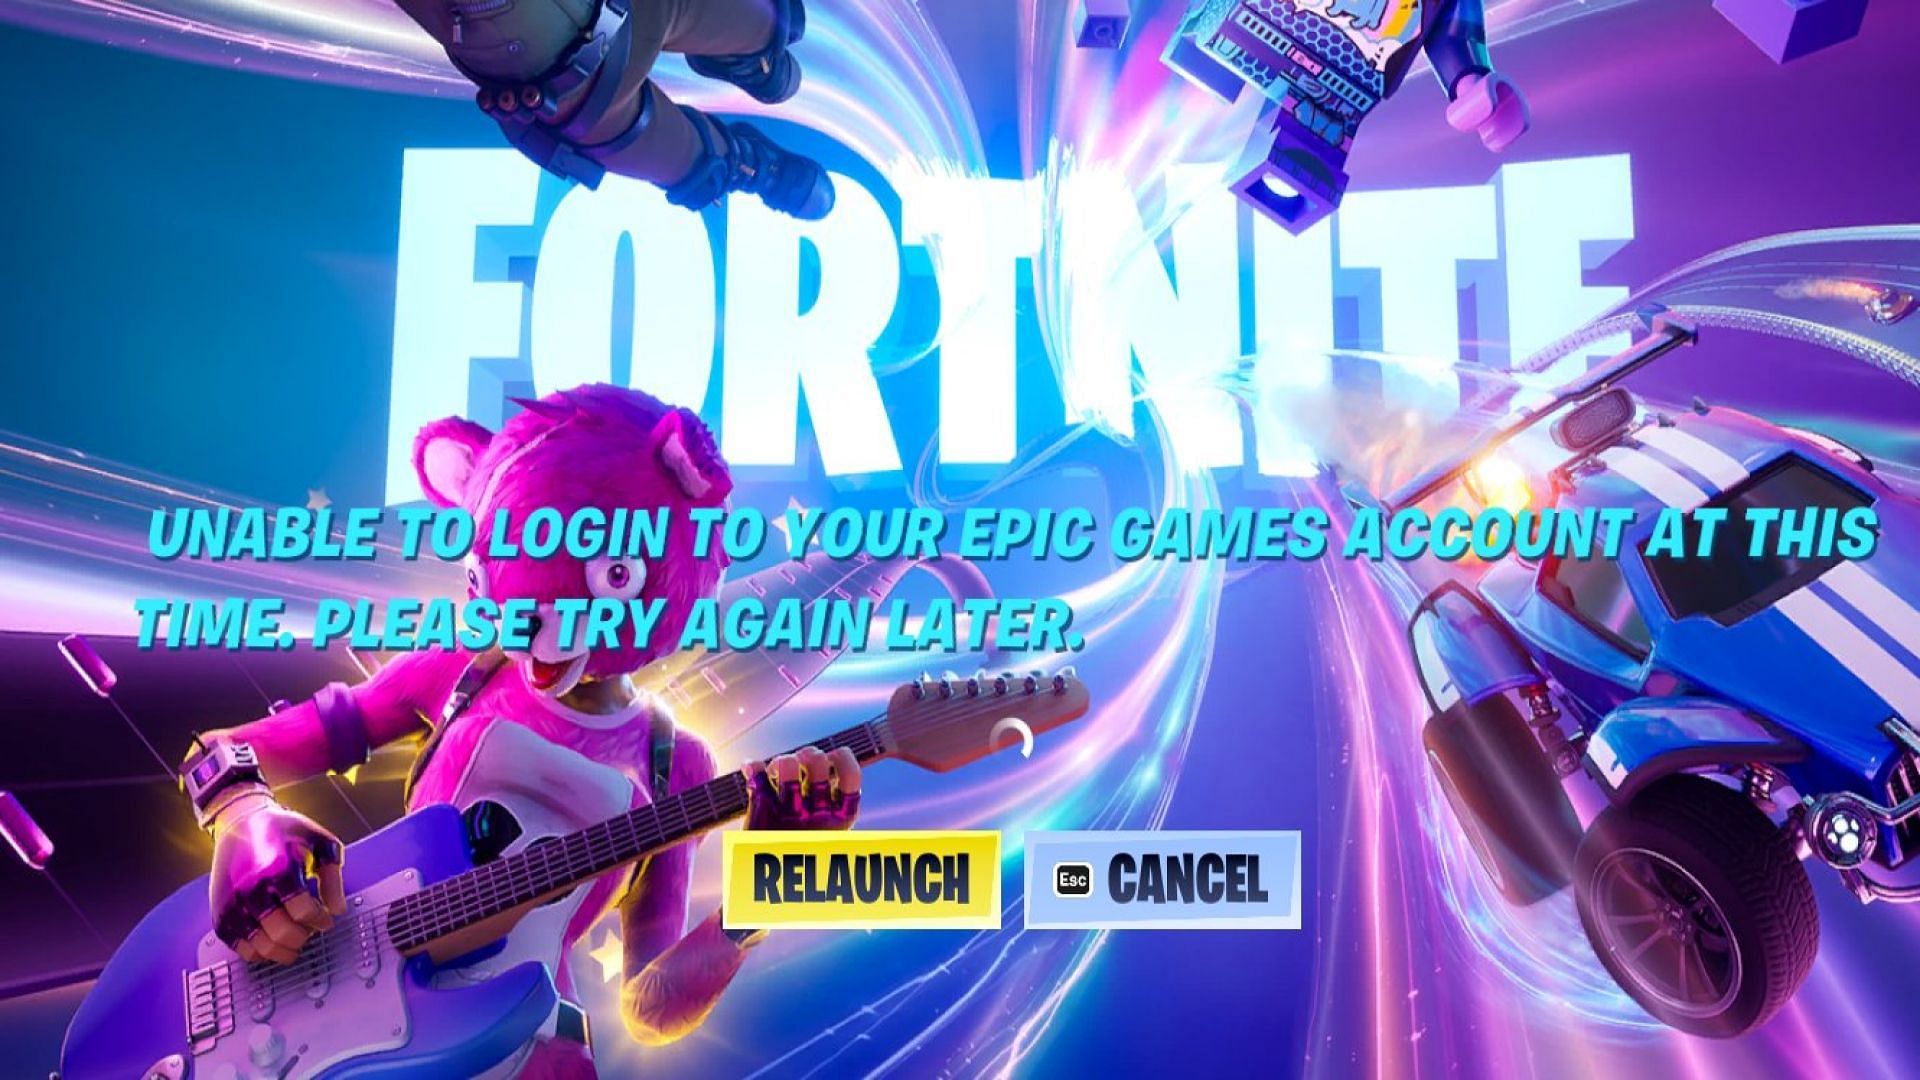 &quot;Unable to login to your Epic Games Account at this time&quot; error (Image via Epic Games/Fortnite)